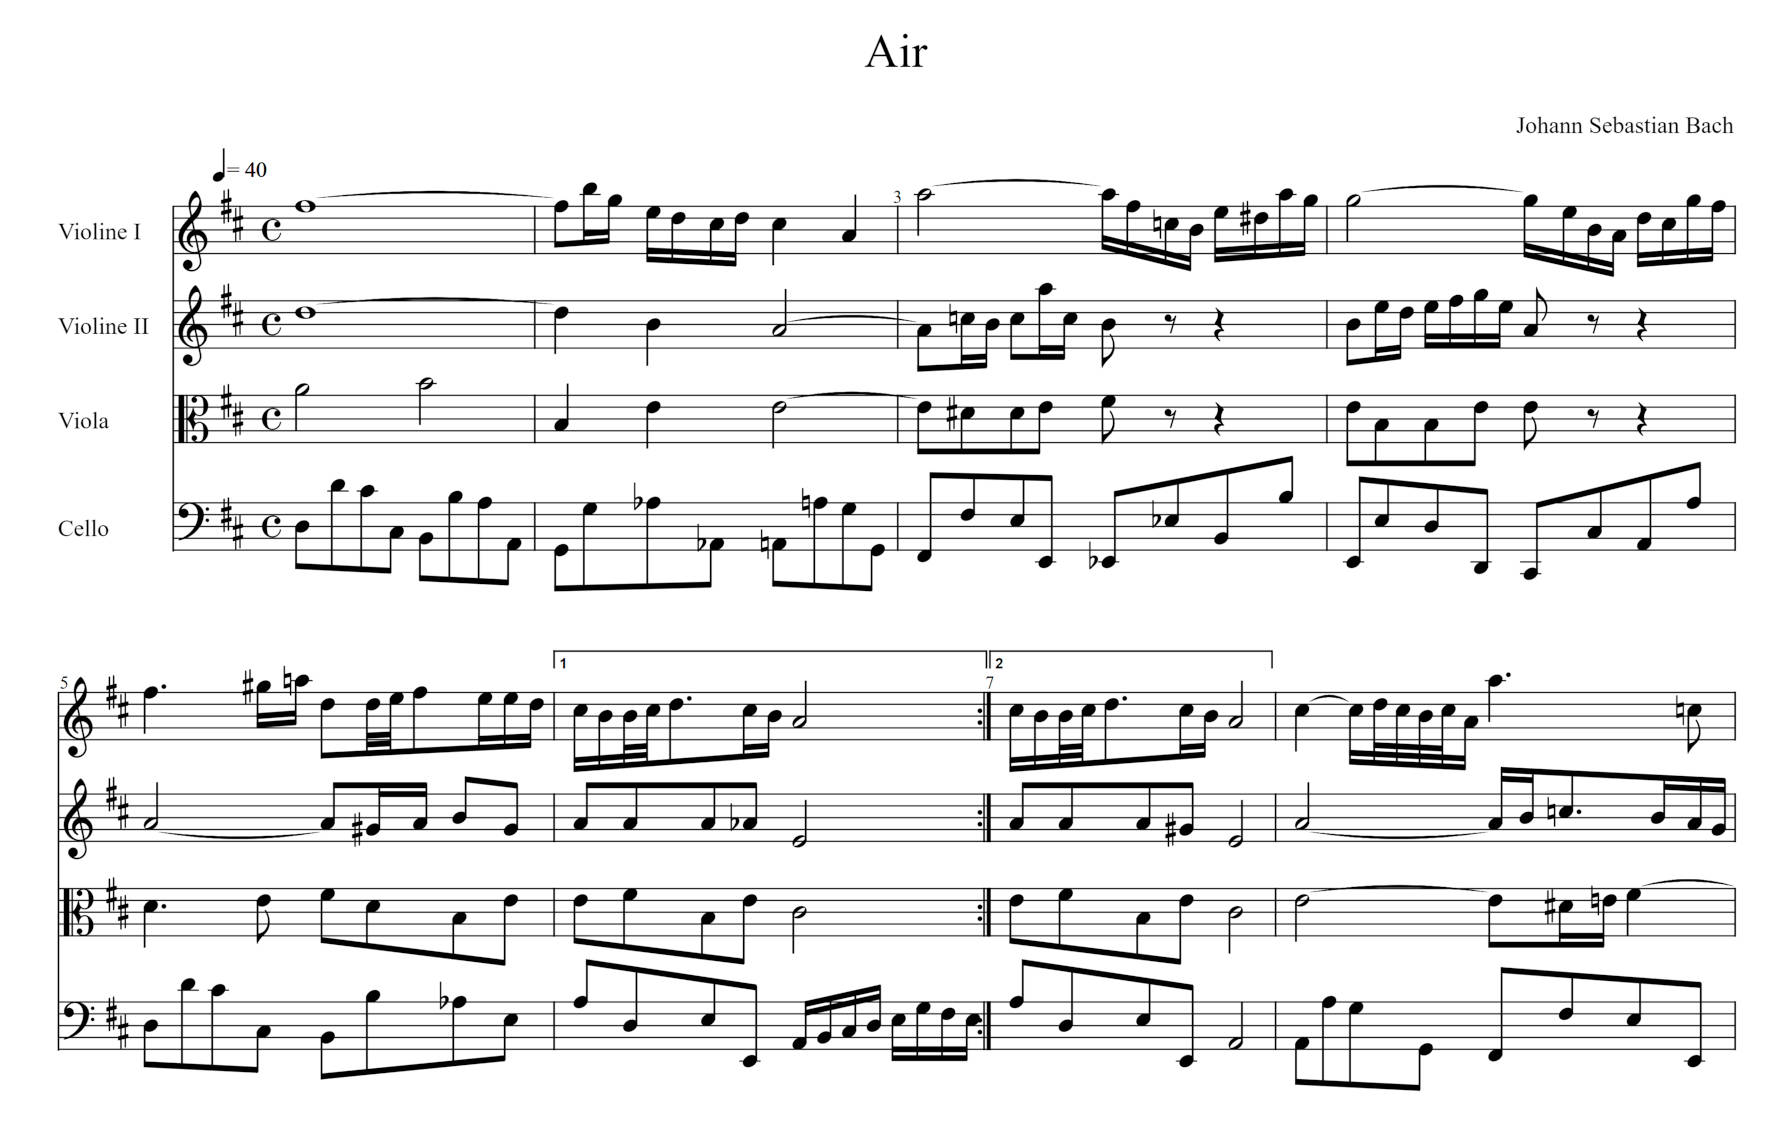 Musical notation of J.S. Bach's 'Air'.